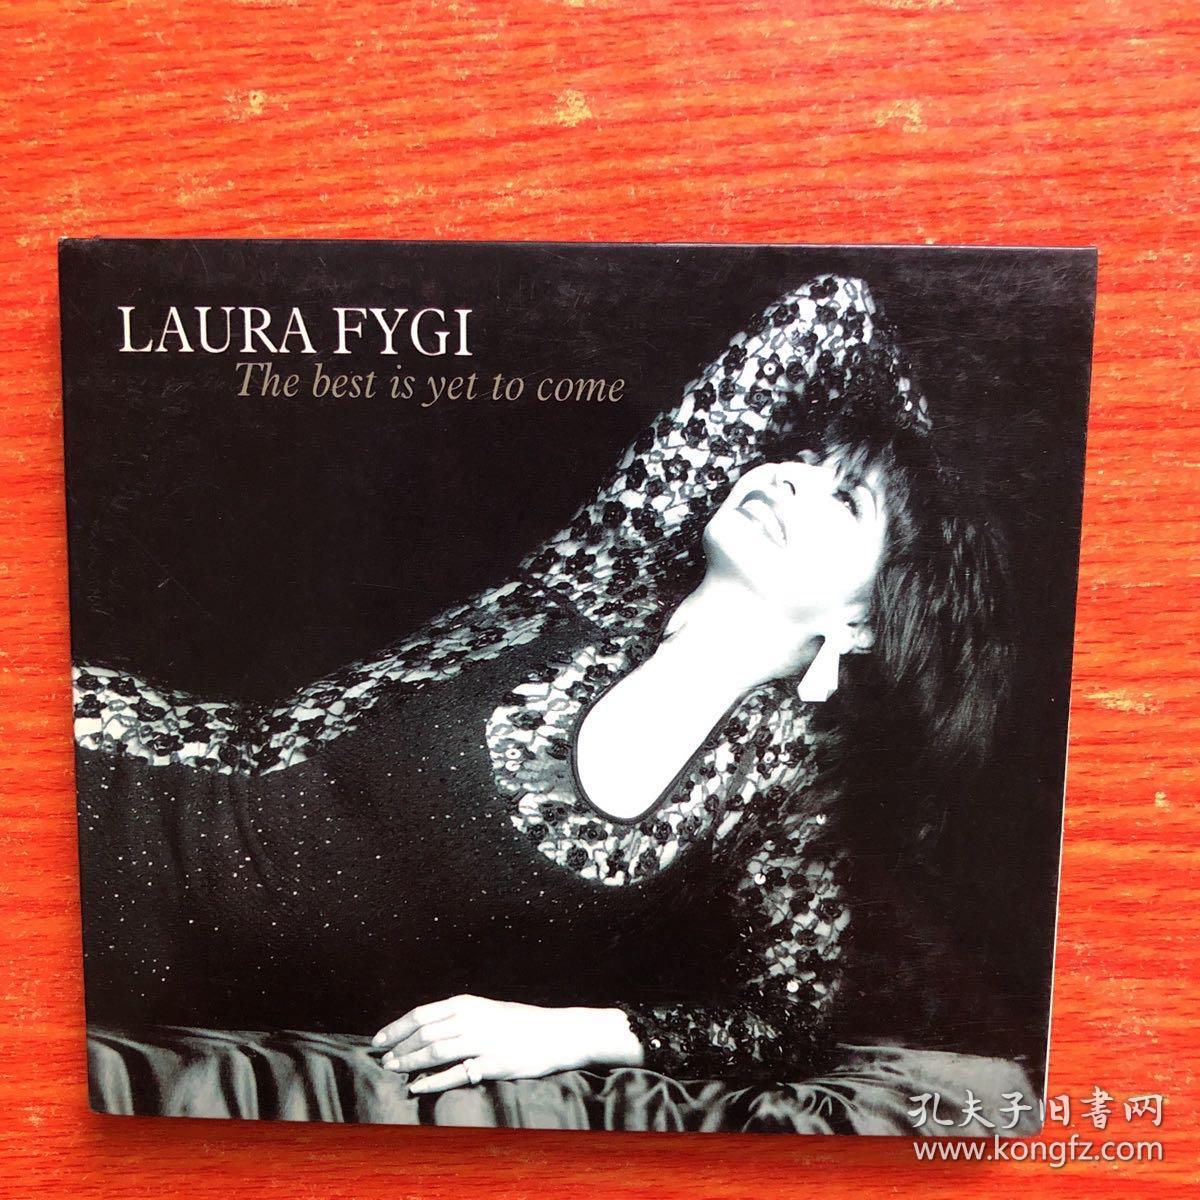 LAURA FYGI The best is yet to come